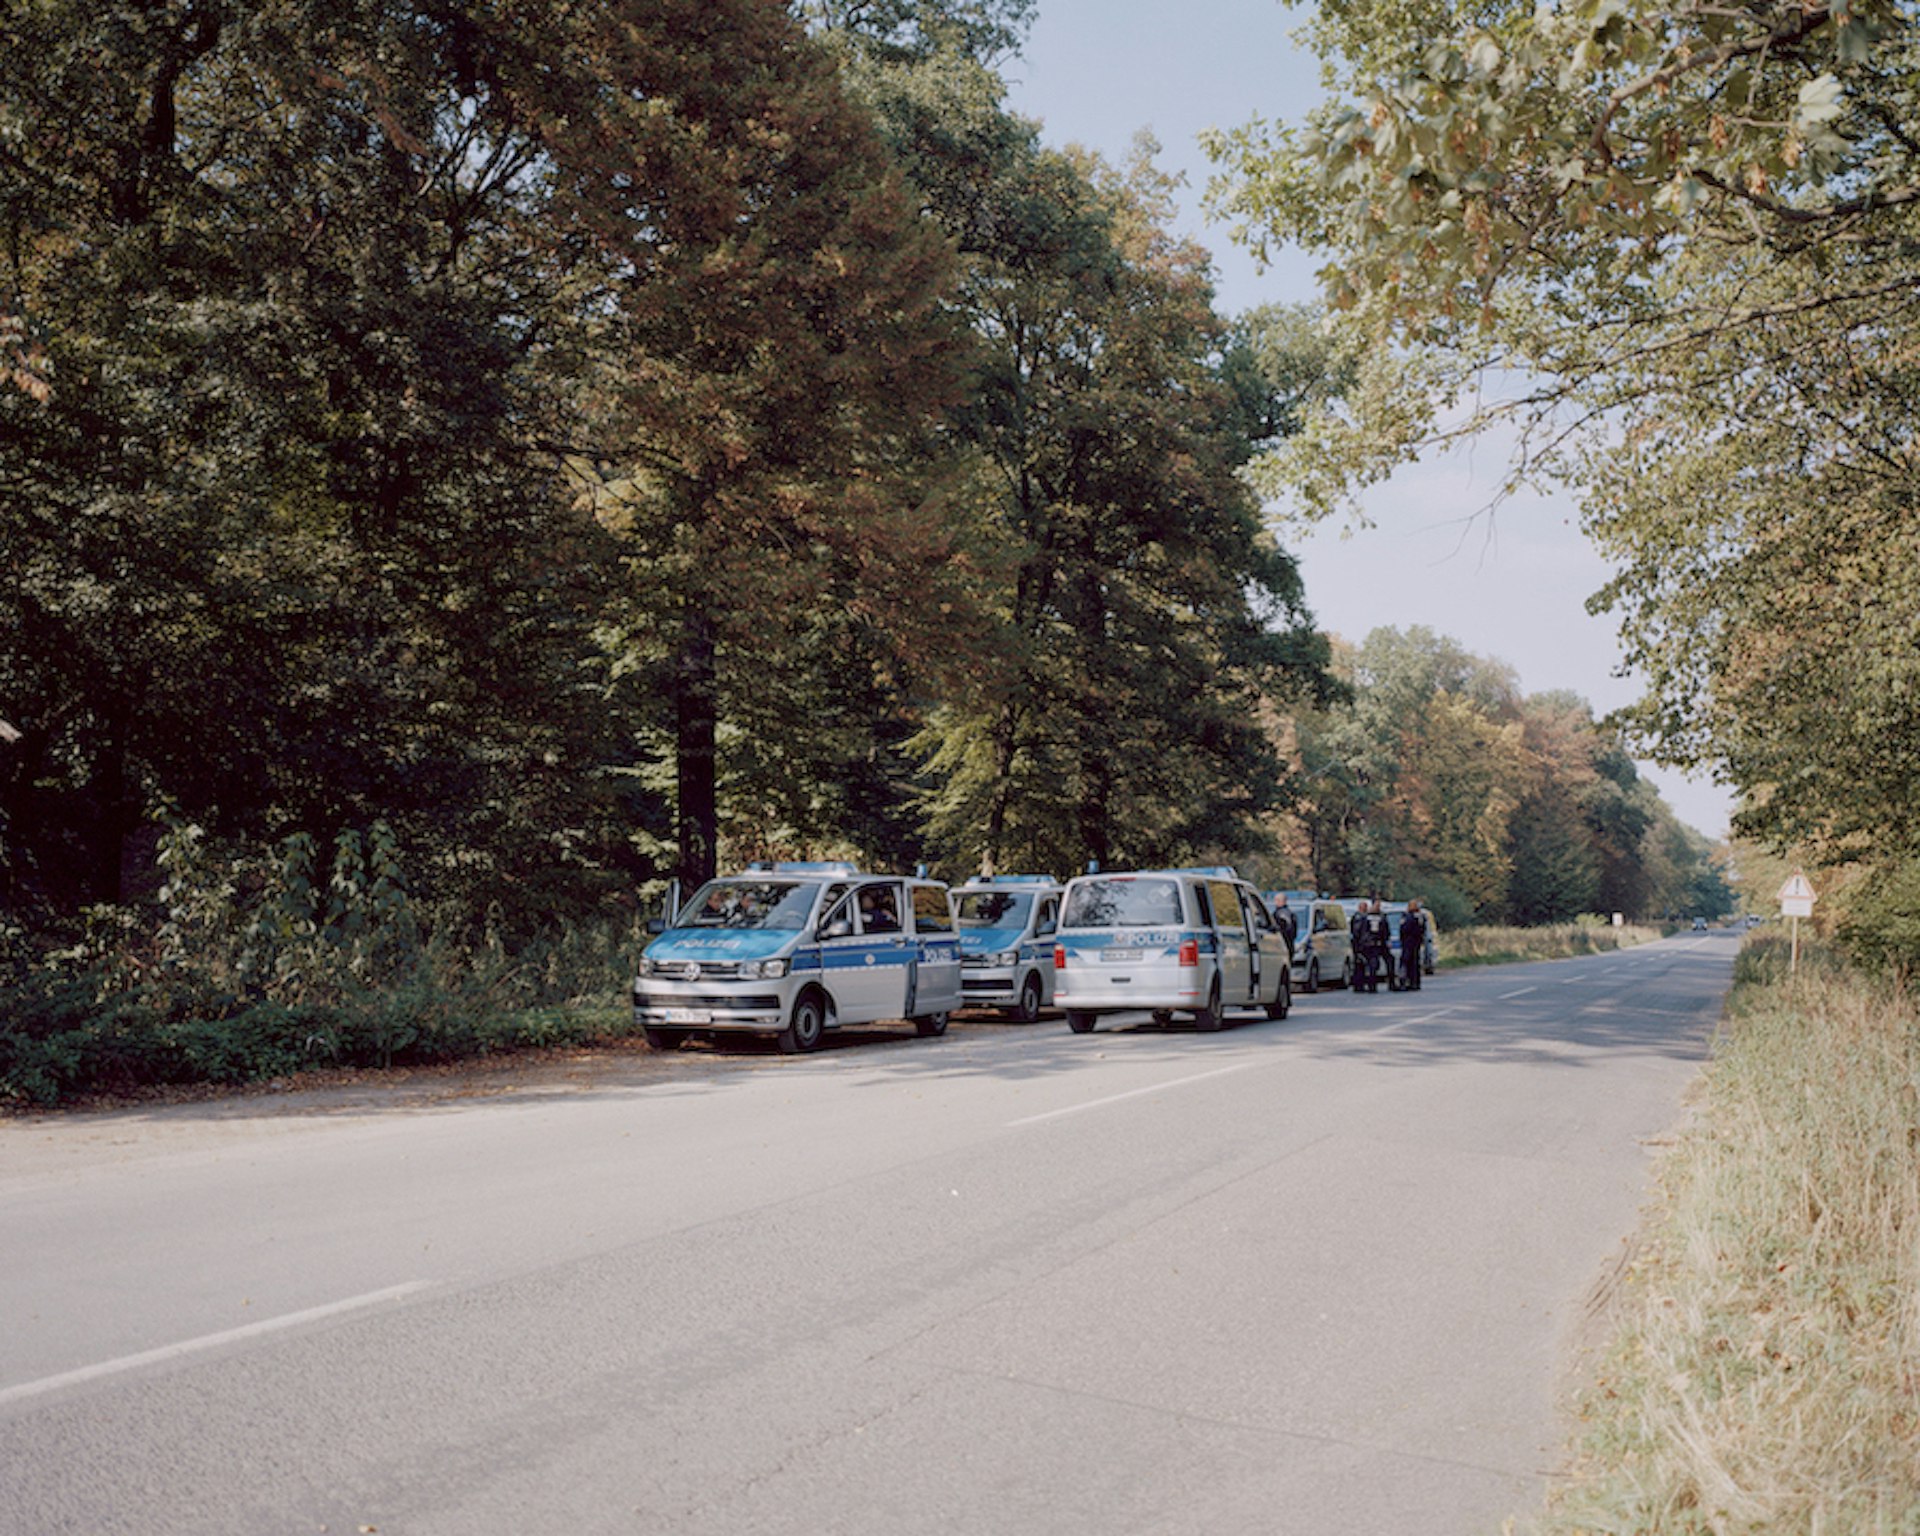 A row of police vehicles line up along the side of the road at Hambach Forest